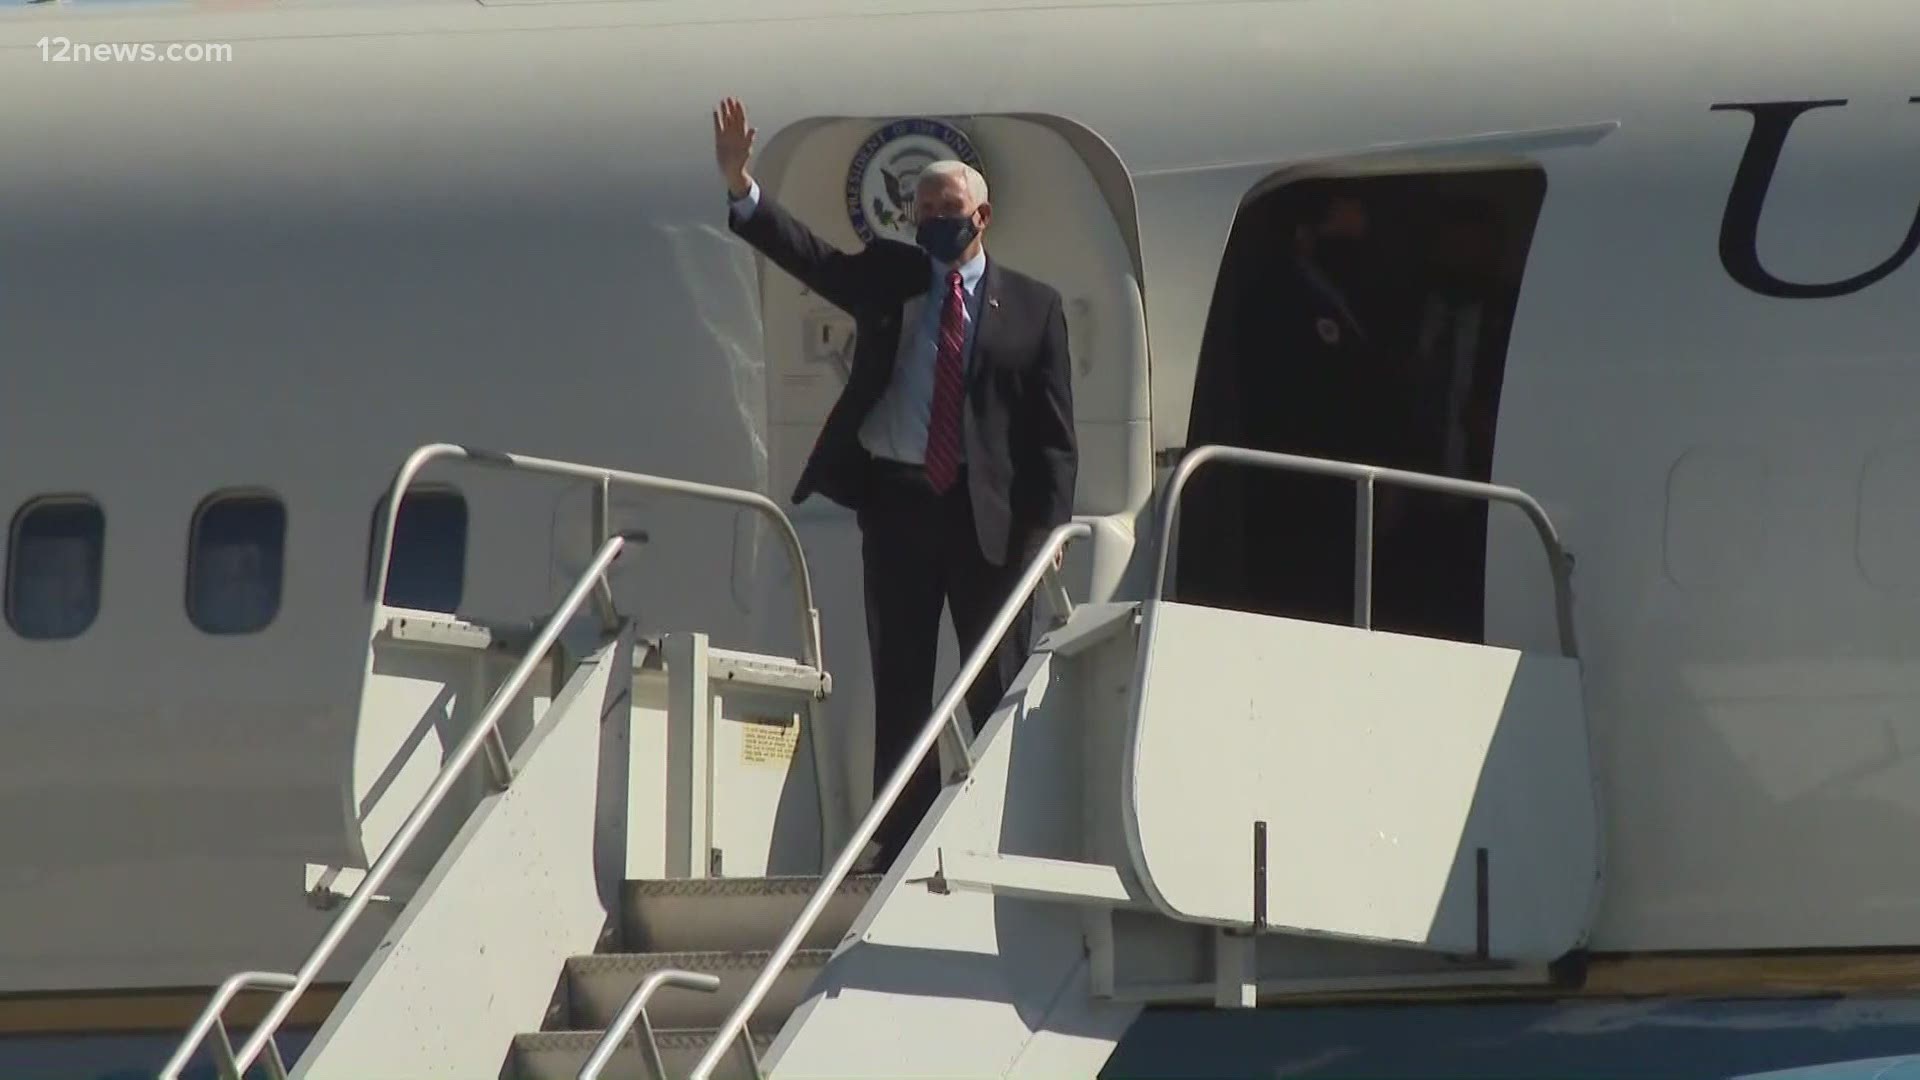 For at least the 15th time this month, the Trump campaign hit Arizona. Vice President Pence stopped in Democratic-leaning cities Flagstaff and Tucson.